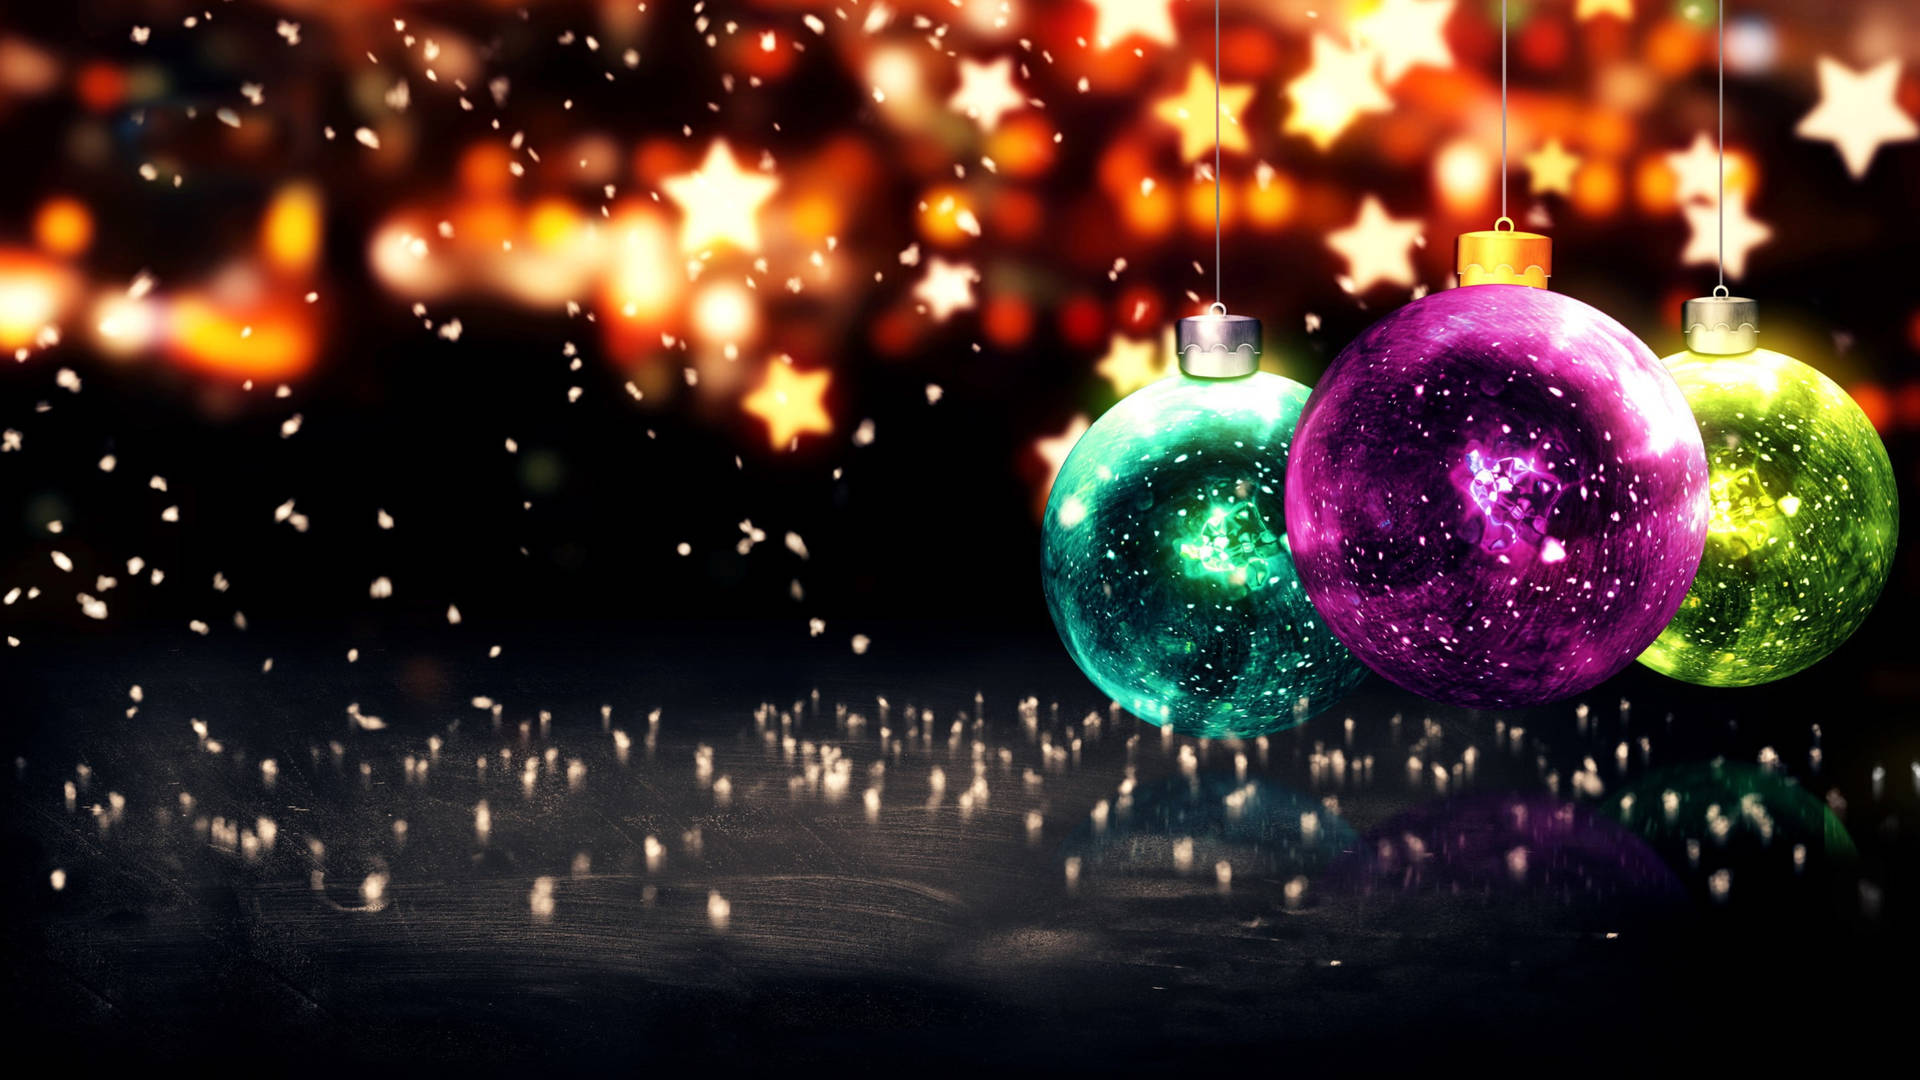 Starry Colorful Christmas Balls Background